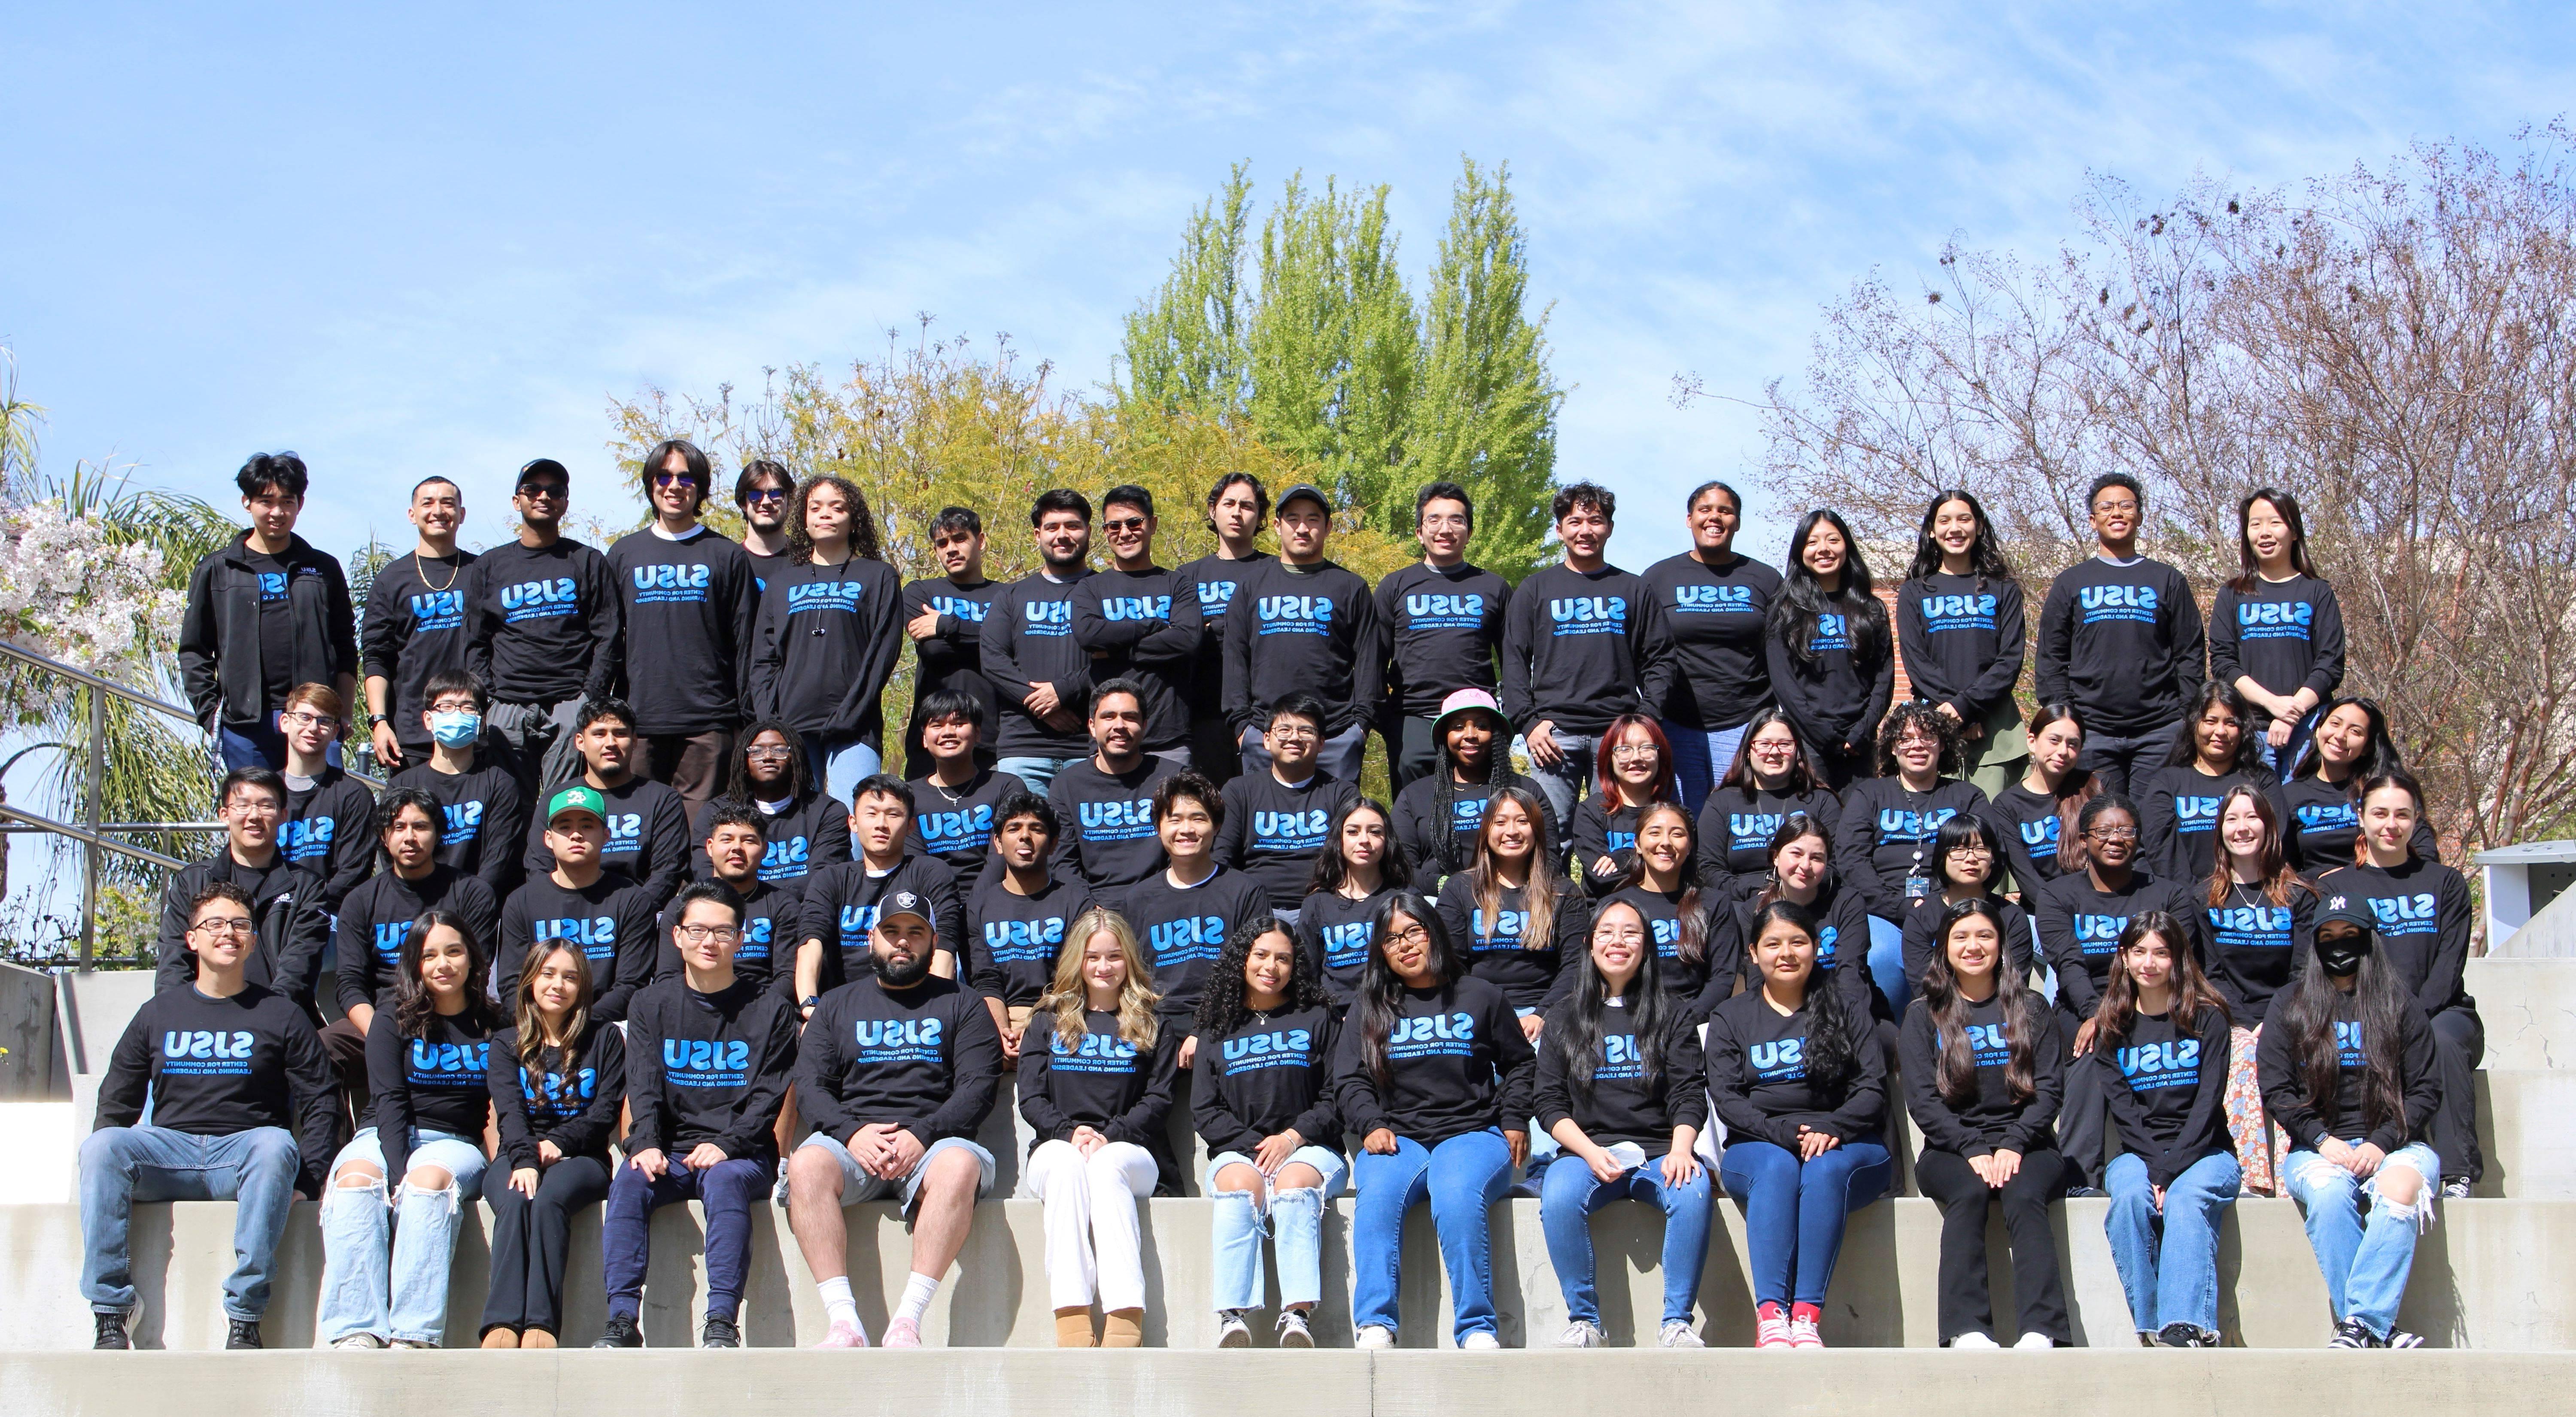 College Corps Cohort in their Center for Community Learning and Leadership shirts